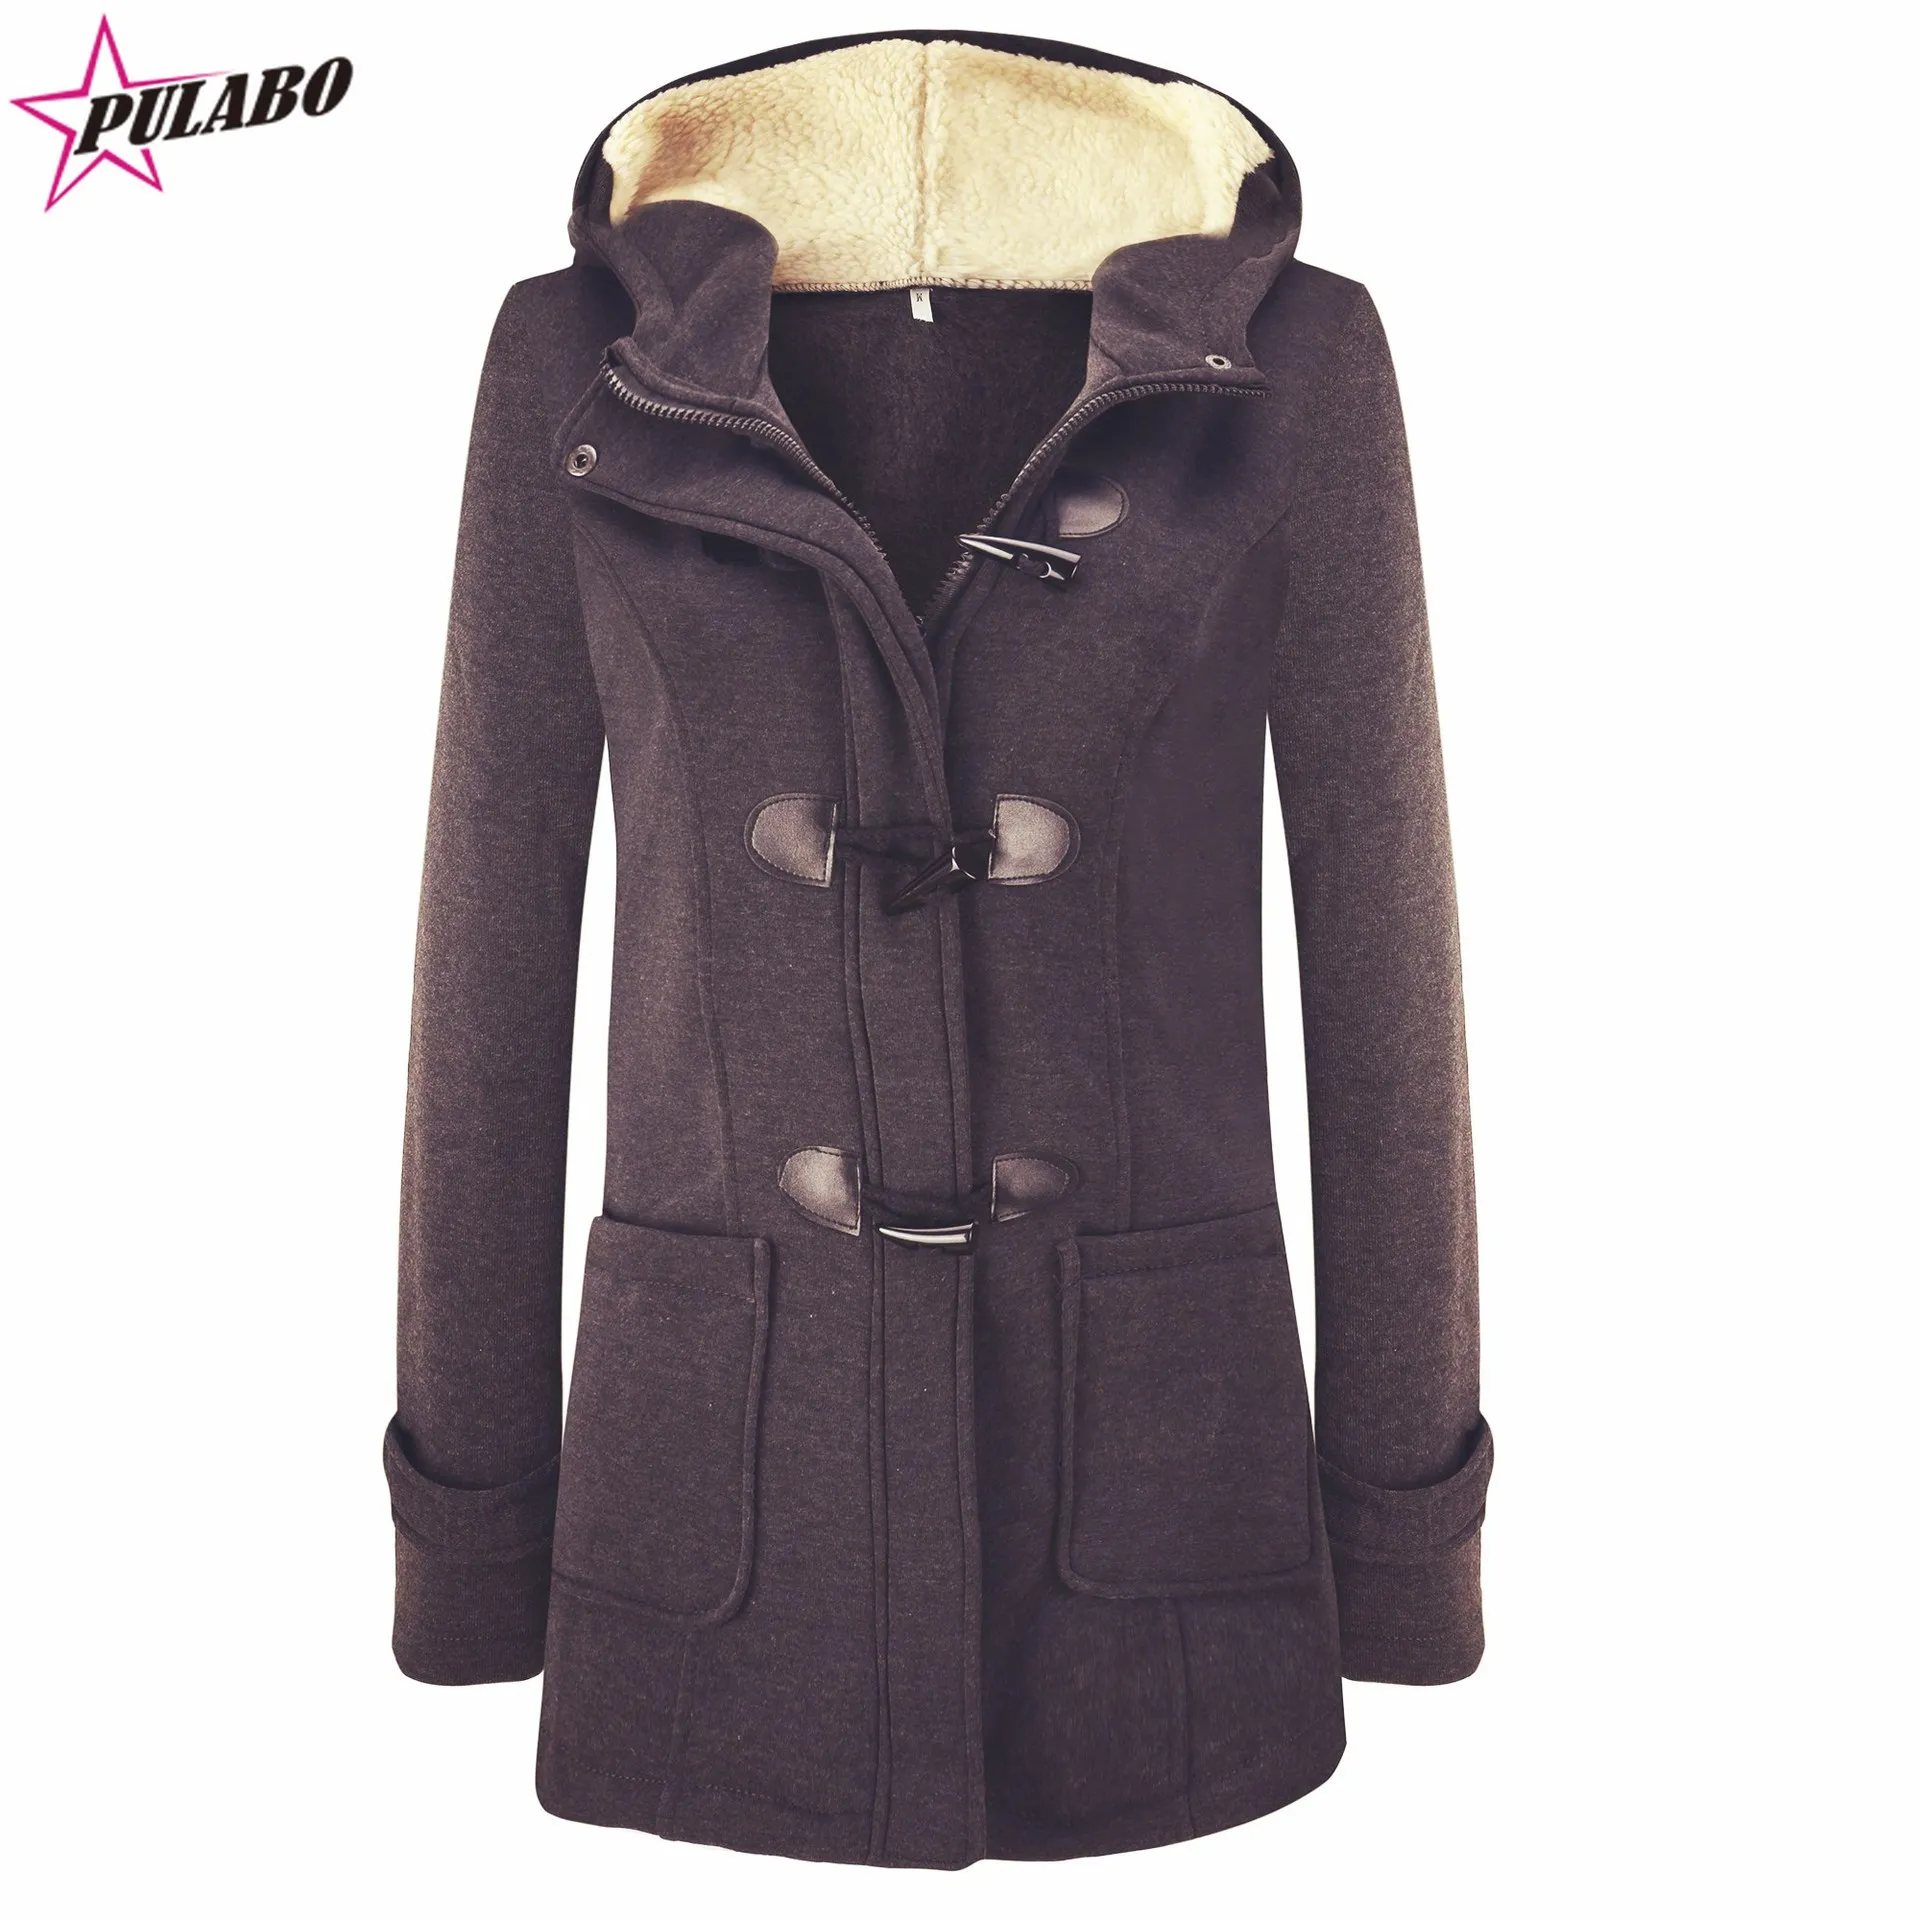 

PULABO Womens Winter Fashion Outdoor Warm Wool Blended Classic Pea Coat Jacket Women Horn Button With Zipper Clothes Hooded